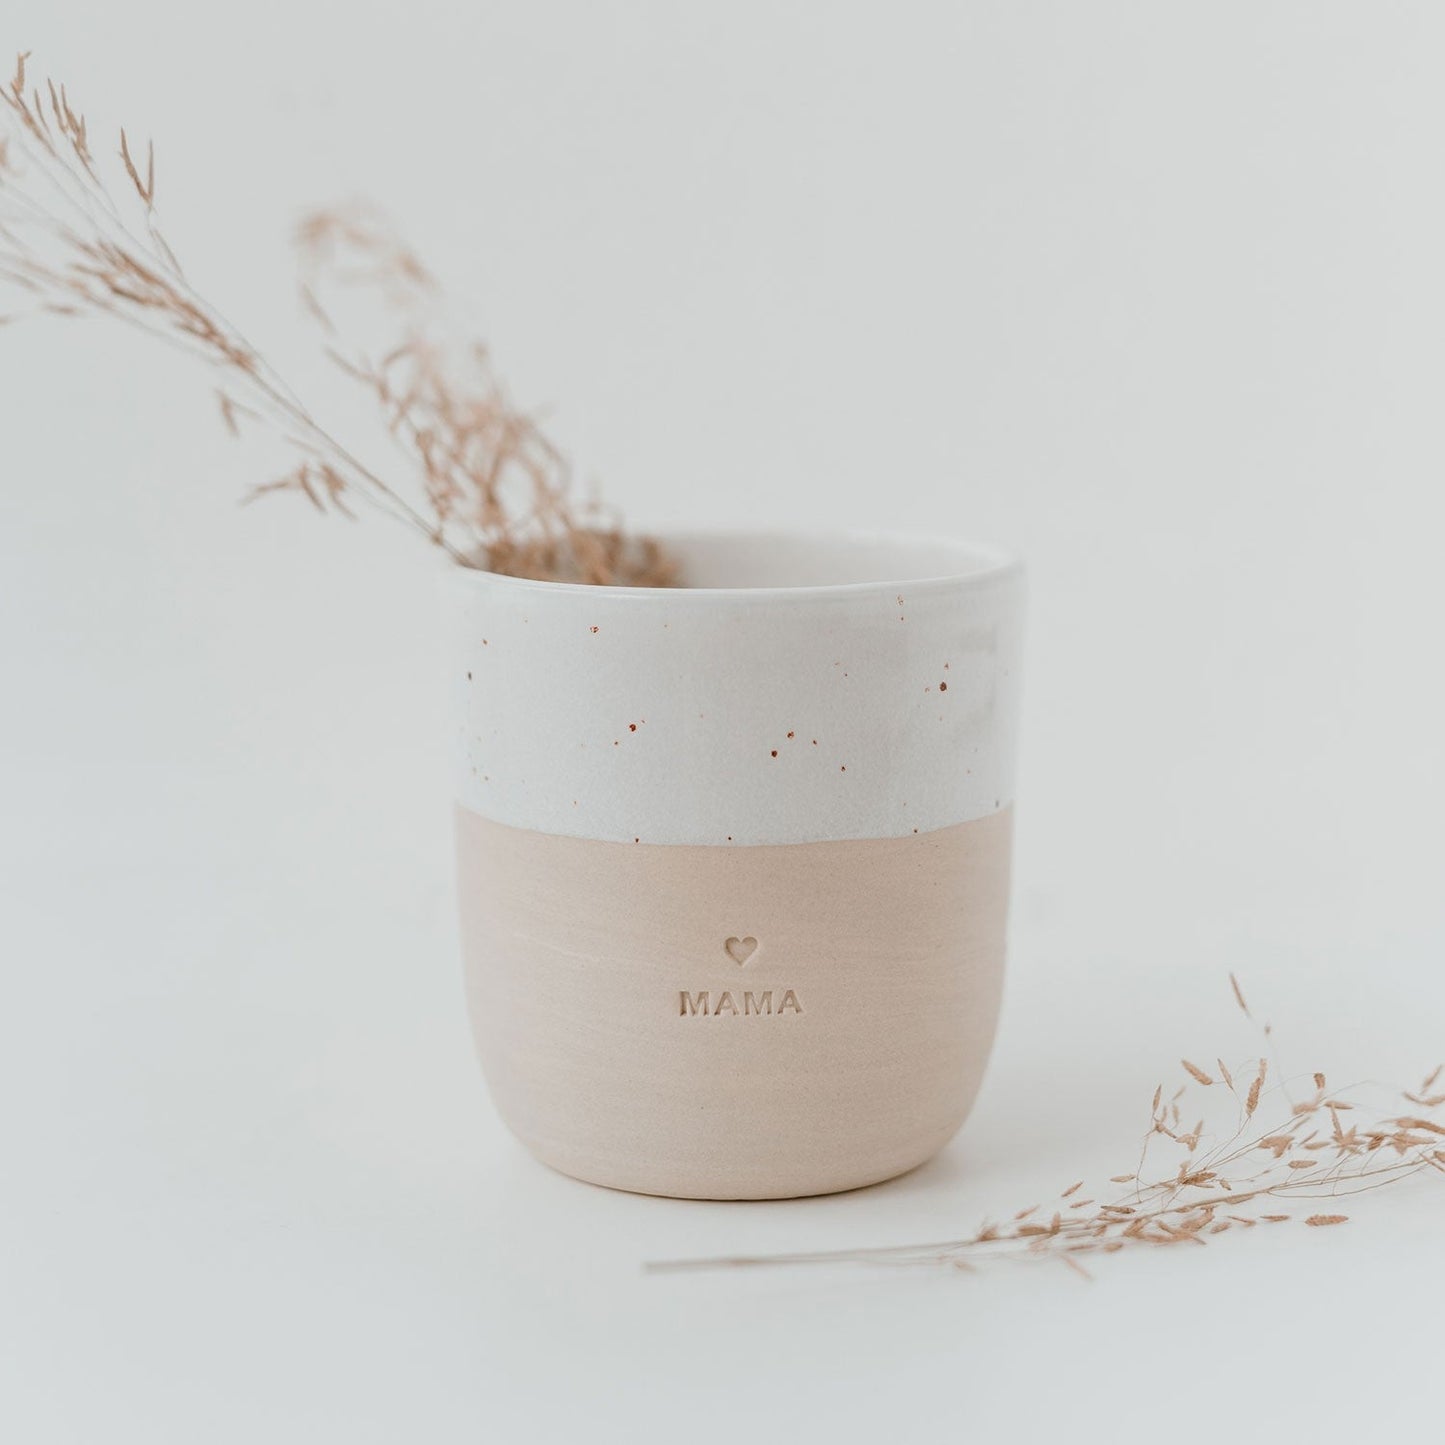 Faerly Candles 'Mama' Candle in Reusable Handmade Stoneware Mug - Egyptian Cotton Fragrance